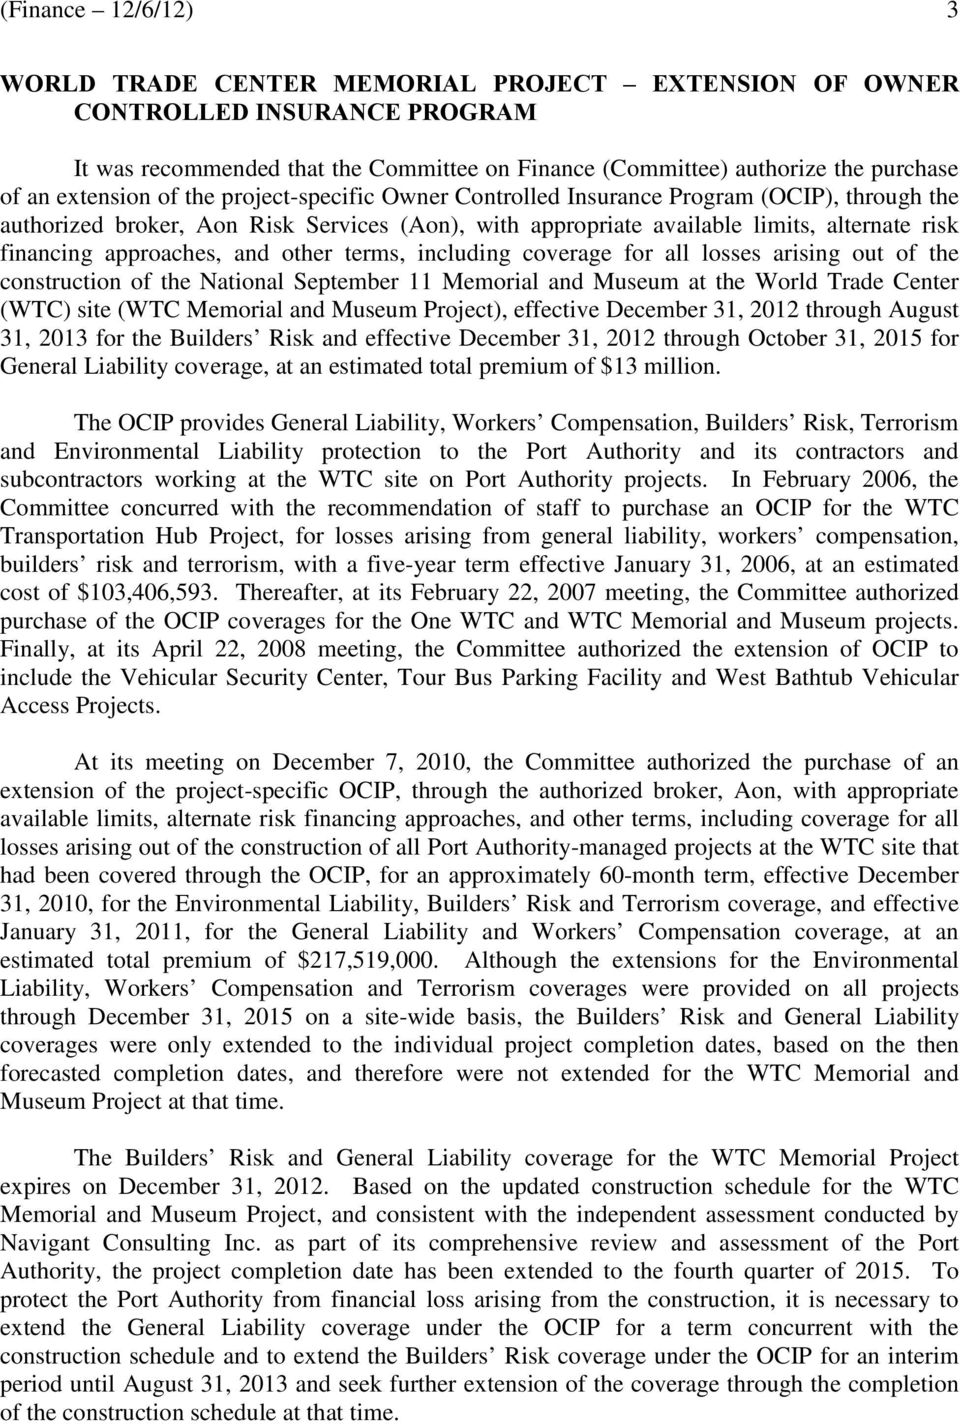 approaches, and other terms, including coverage for all losses arising out of the construction of the National September 11 Memorial and Museum at the World Trade Center (WTC) site (WTC Memorial and